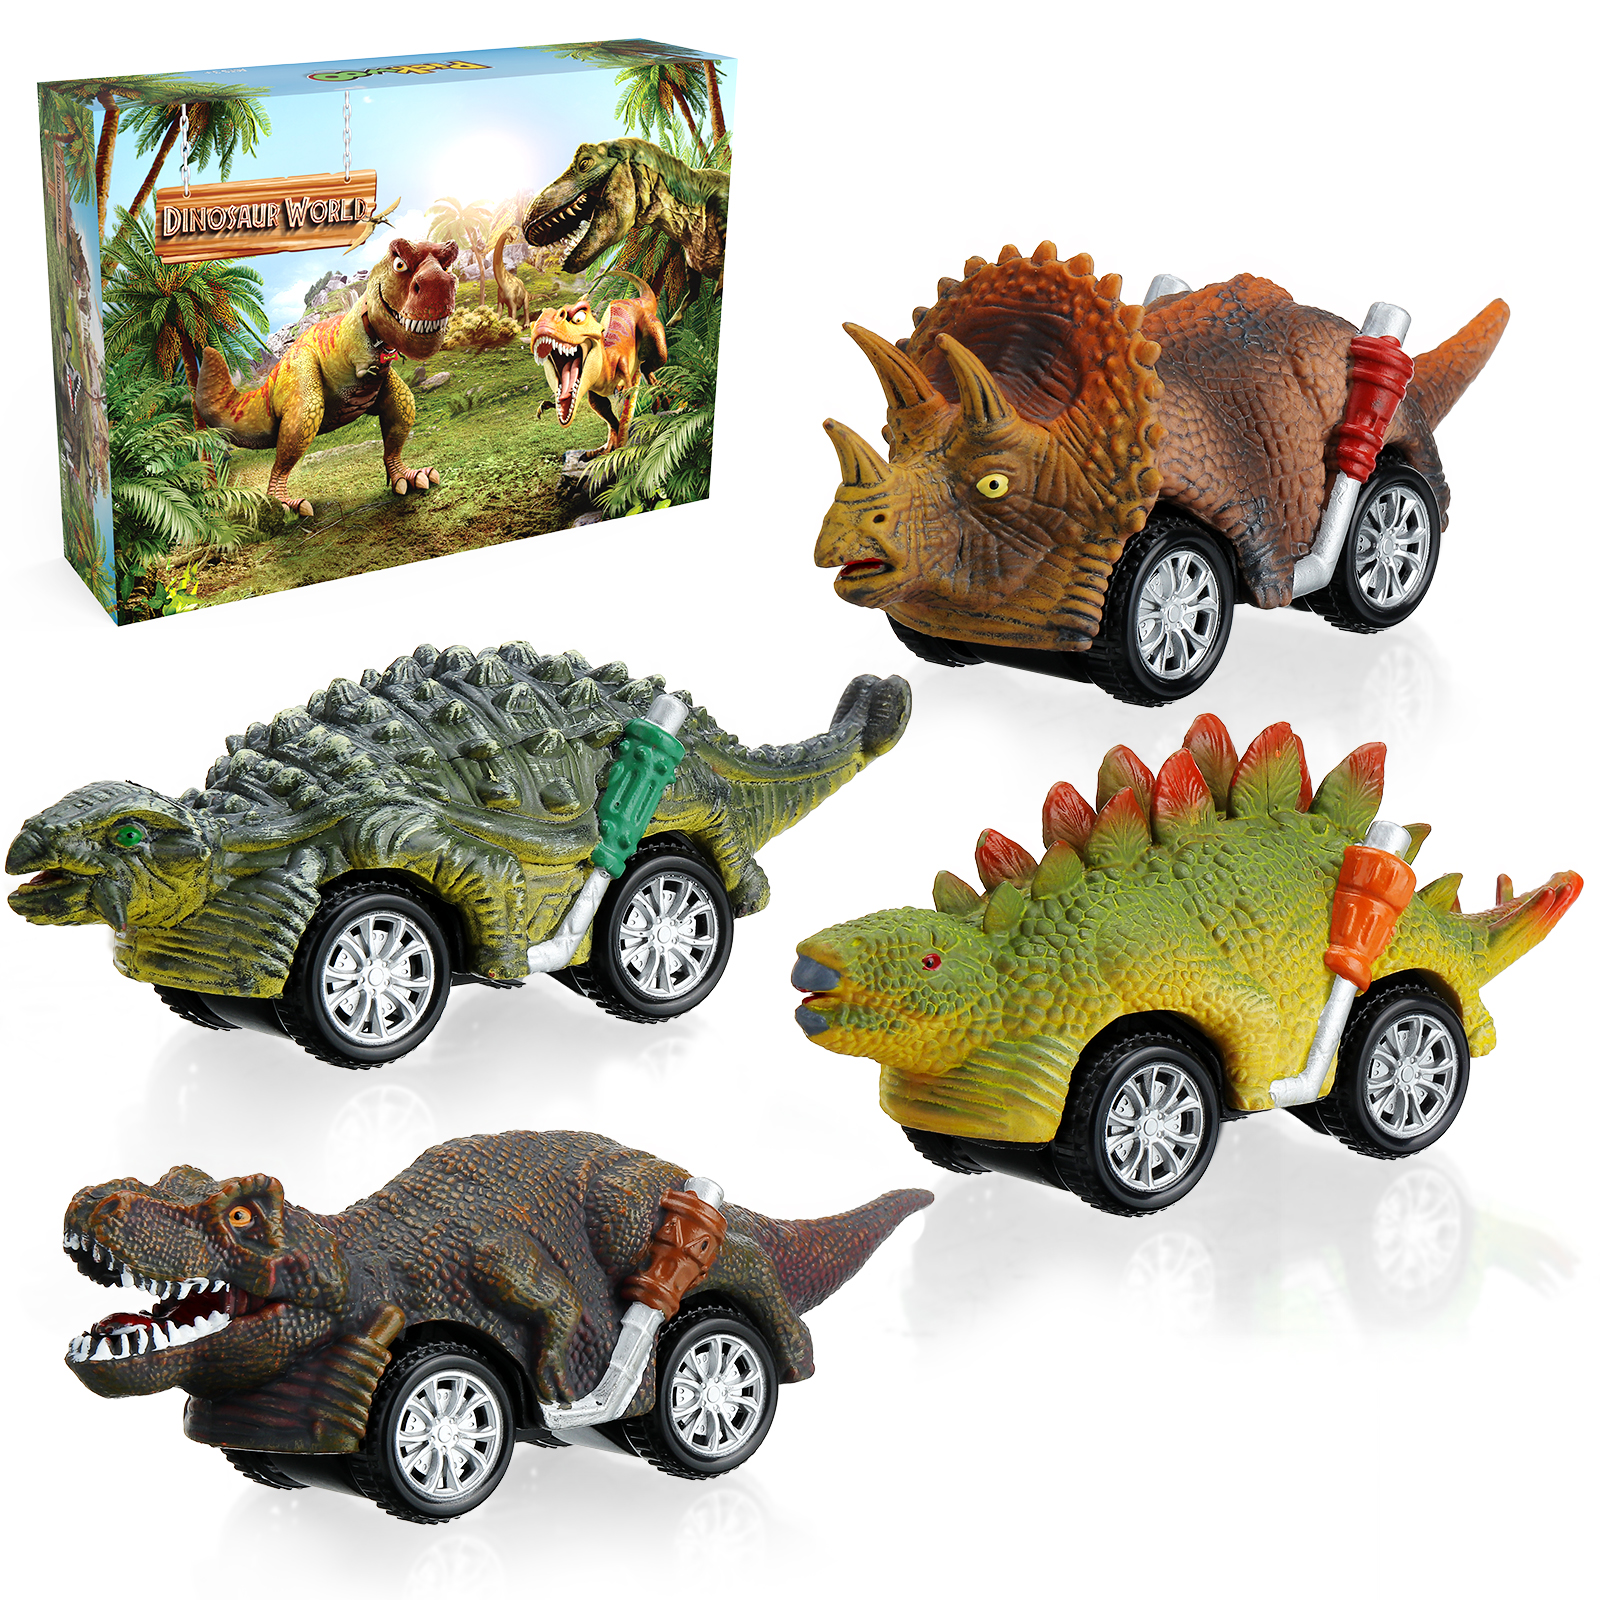 Pickwoo-Dinosaur-Toys-Cars-Inertia-Vehicles-Toddlers-Kids-Dinosaur-Party-Games-with-T-Rex-Dino-Toys--1895631-7